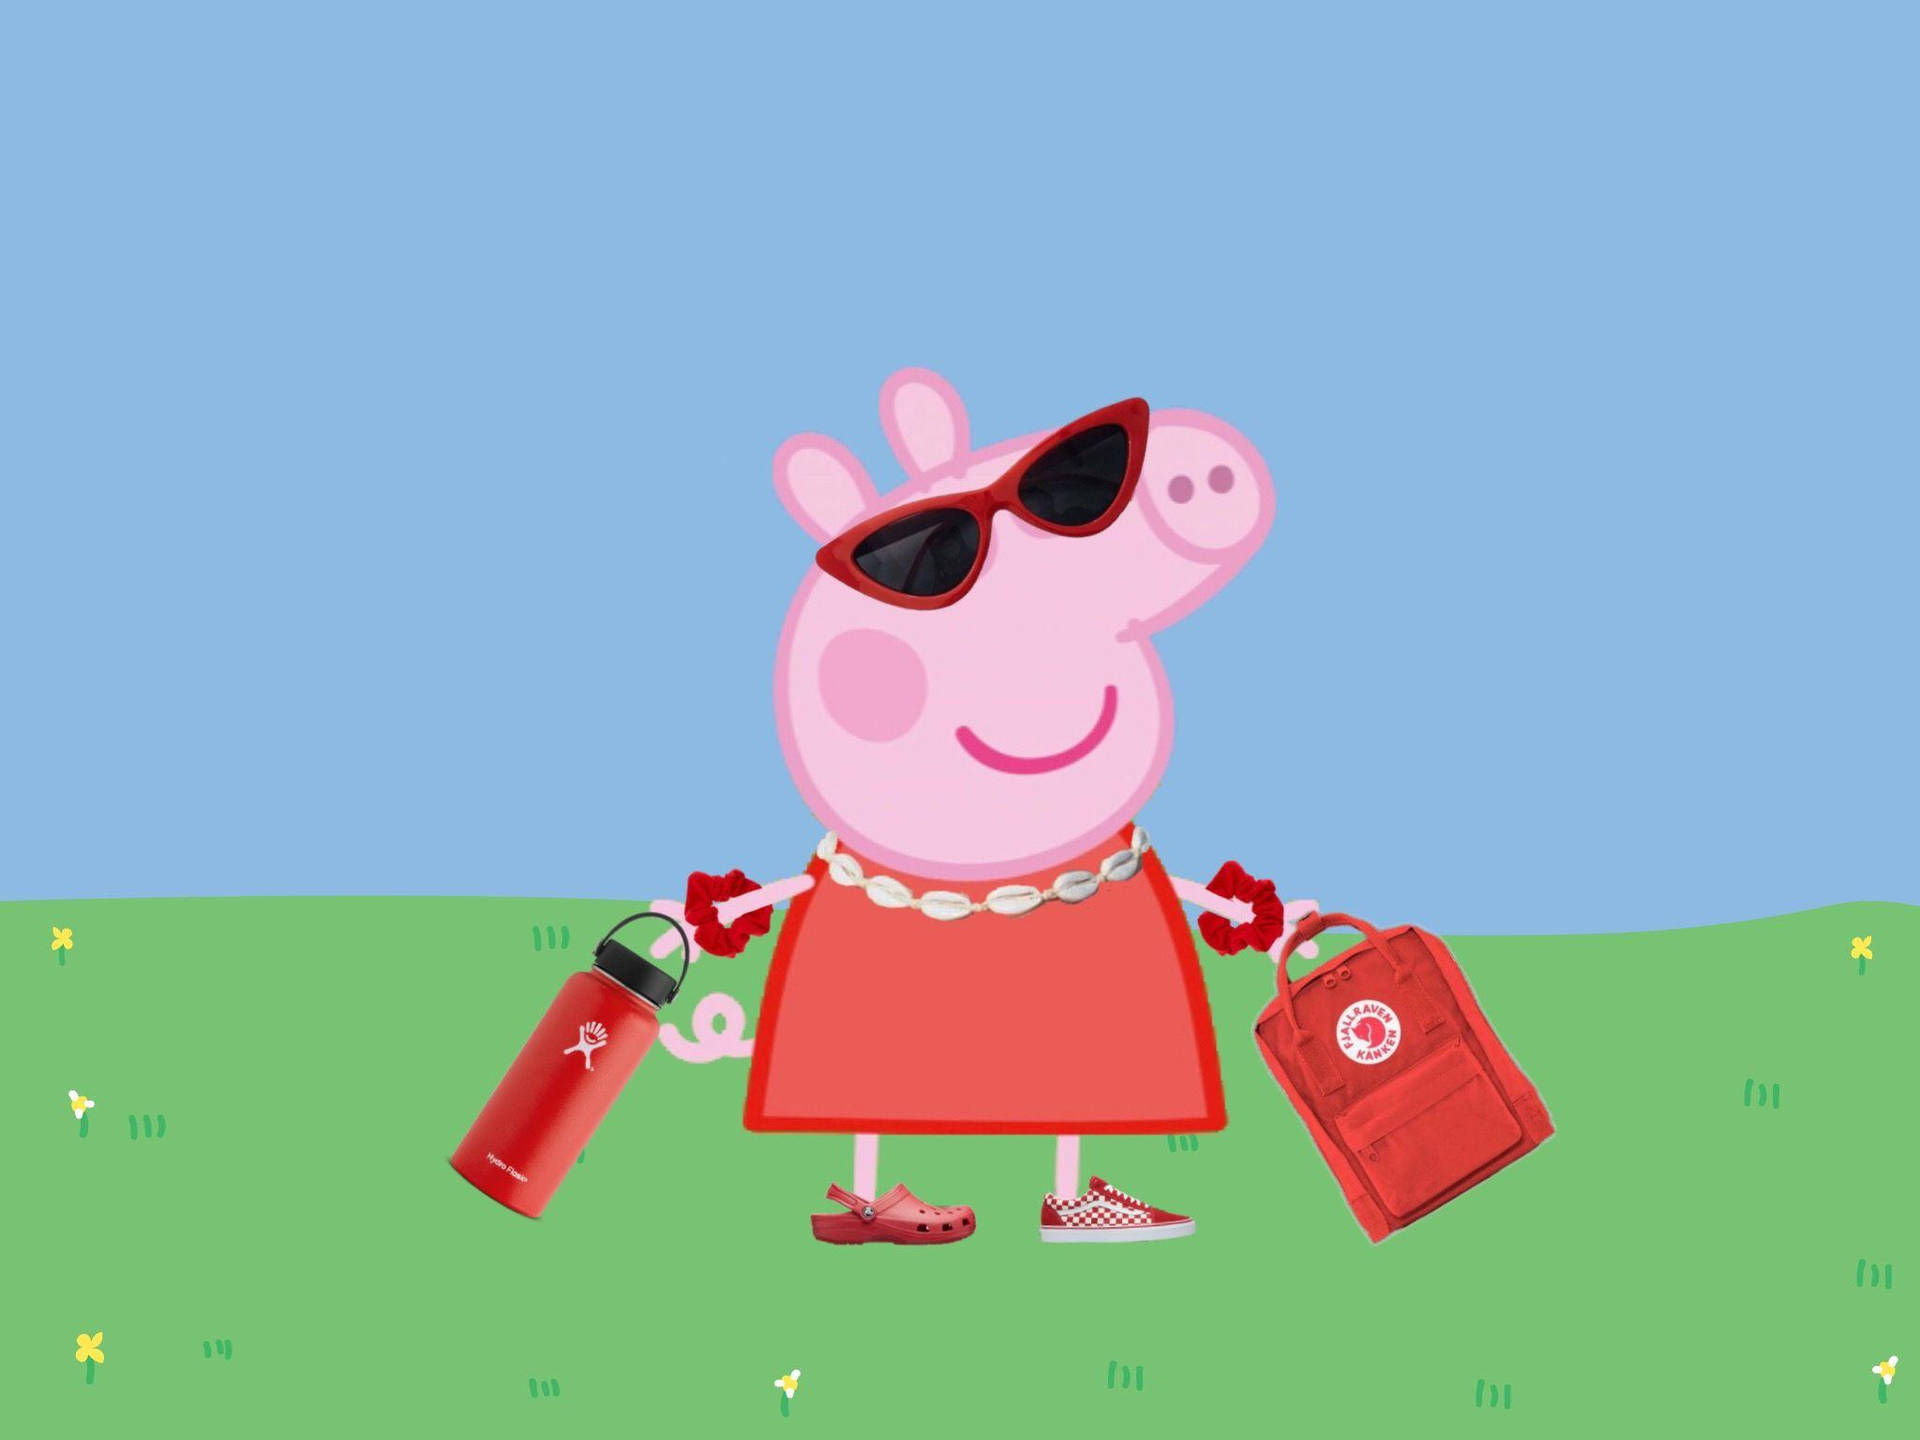 Baddie Peppa Pig looks fierce and ready to take on any obstacles! Wallpaper